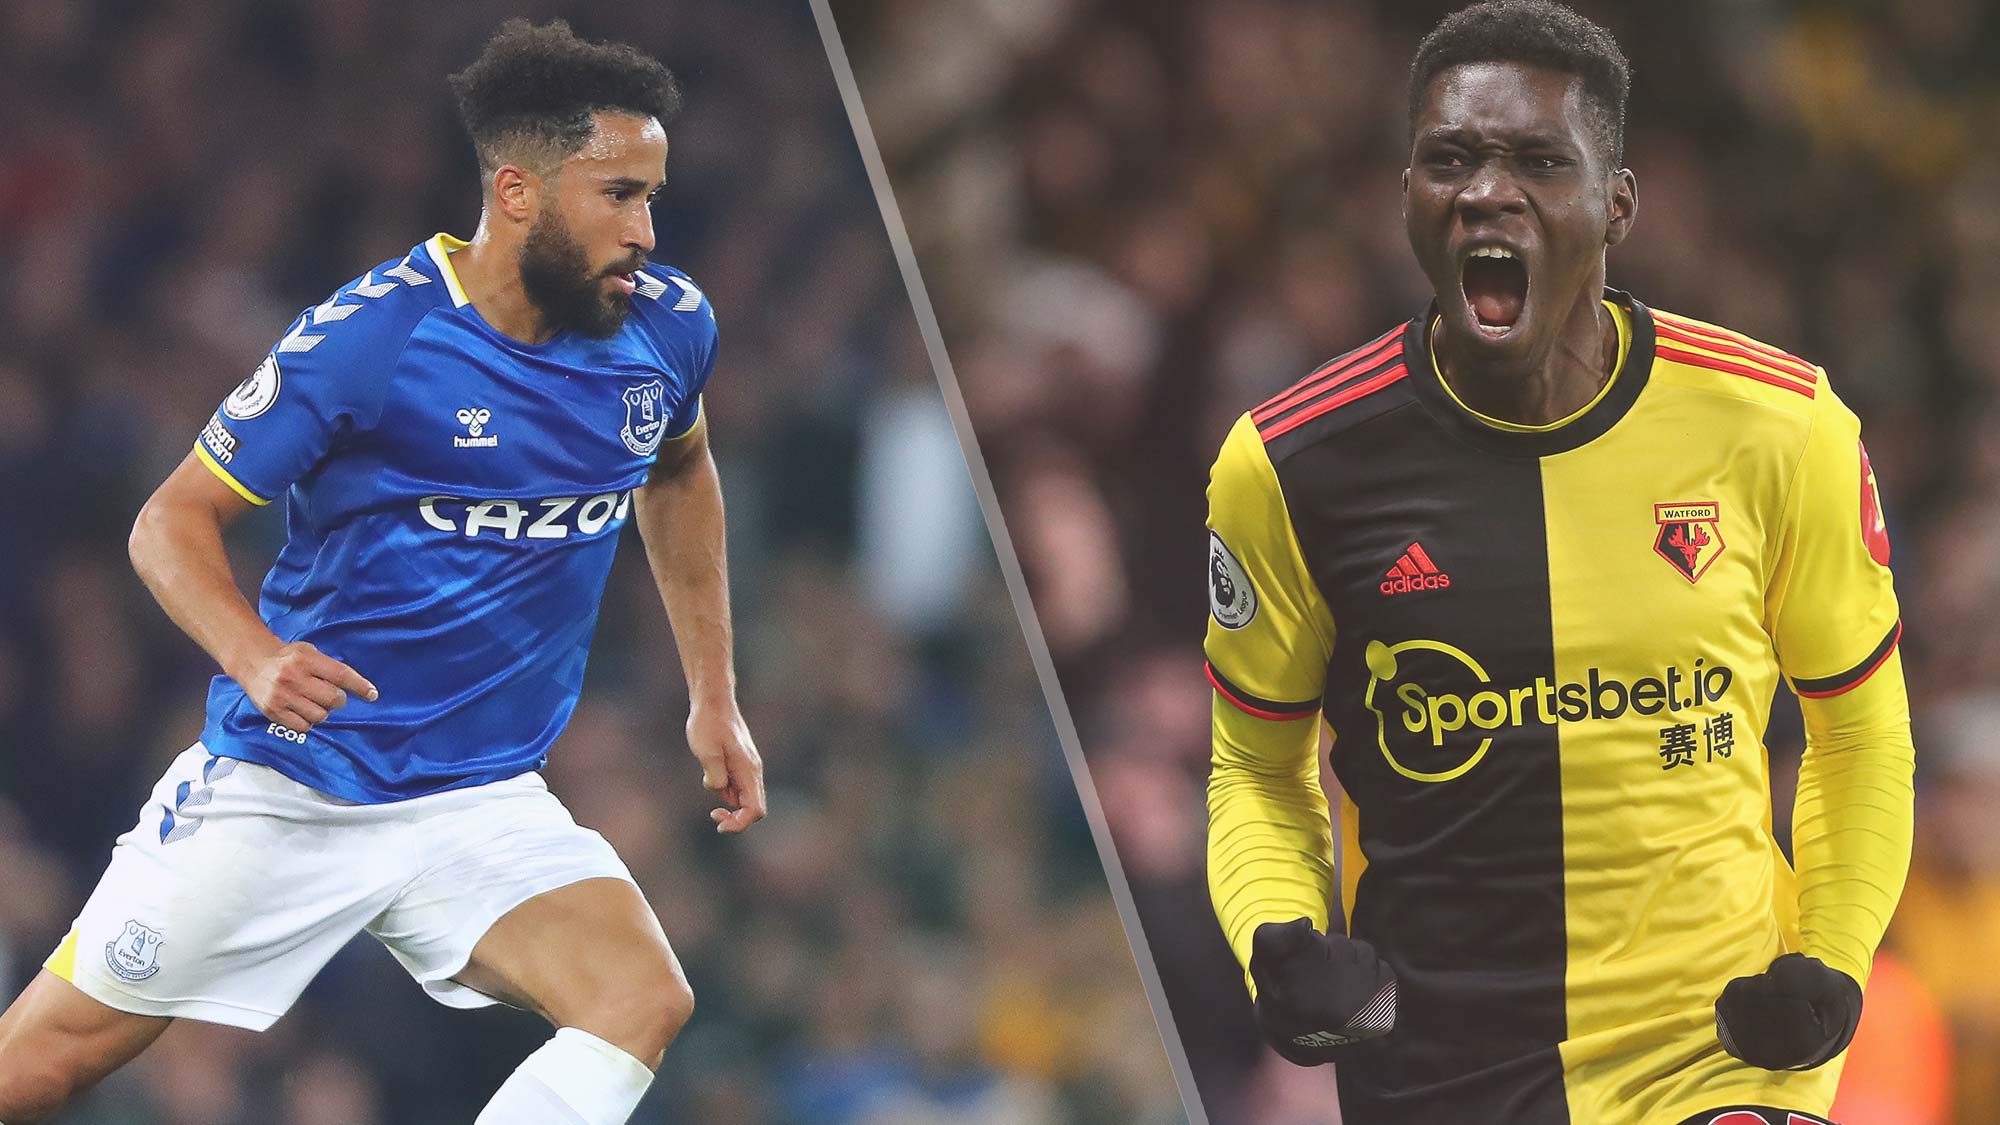 Everton vs Watford live stream — how to watch Premier League 21/22 game online Toms Guide